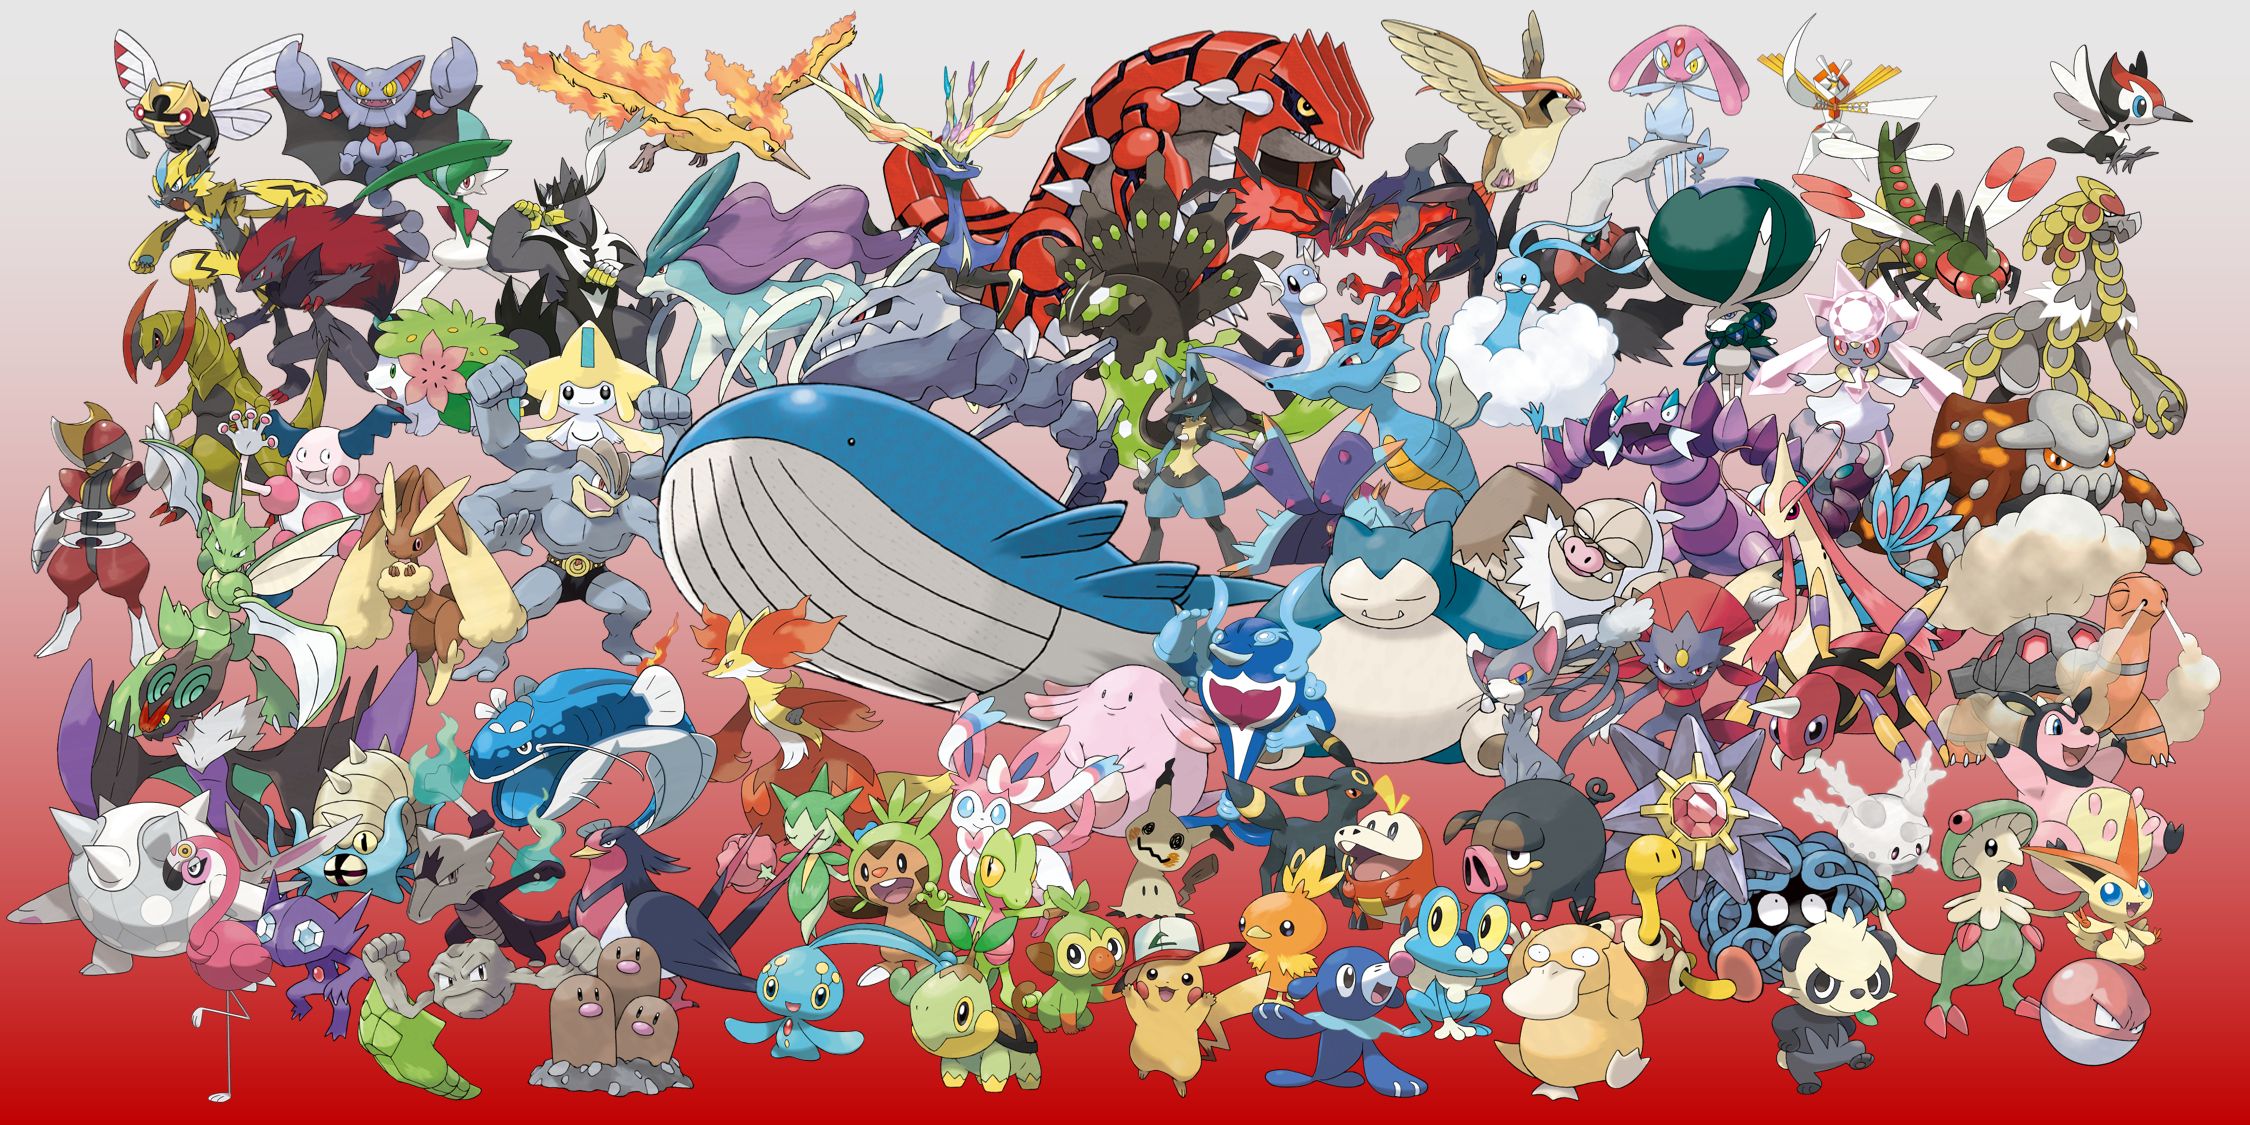 Pokemon with 7 letter names: Pikachu, Groudon, Wylord, Snorlax, Turtwig, Lucario and more.